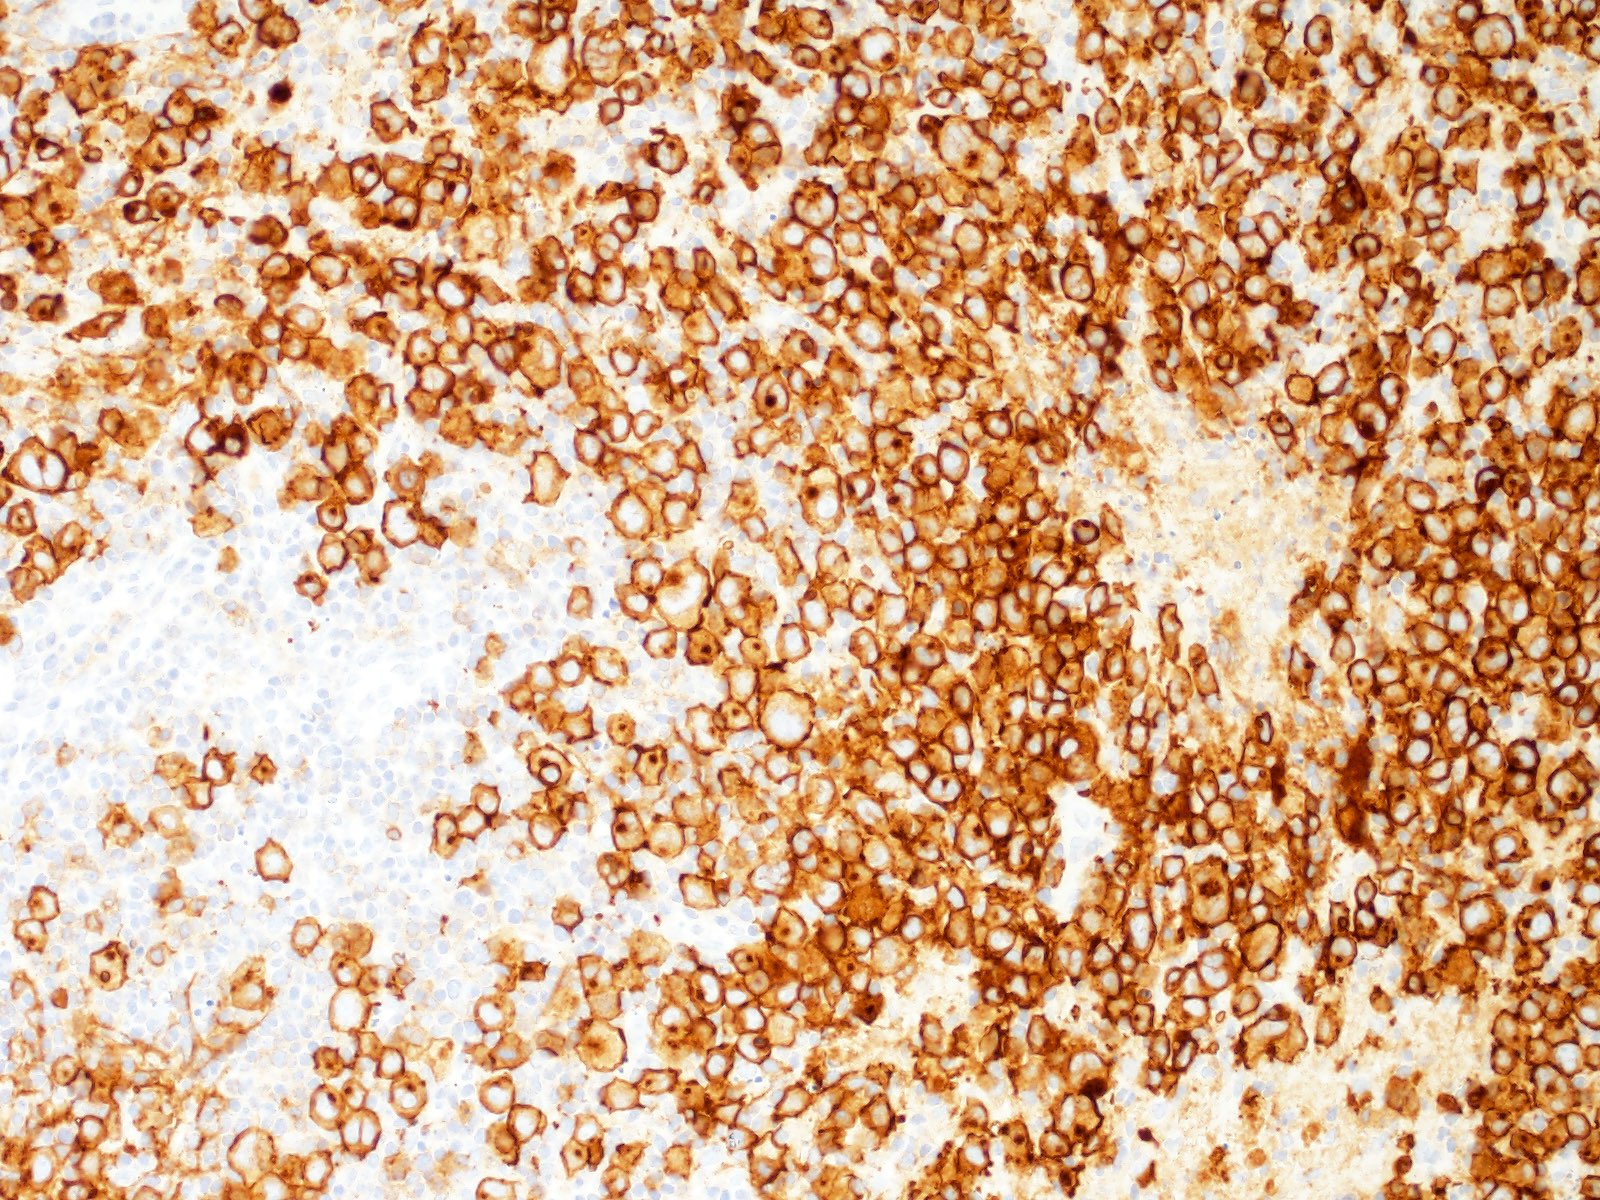 Syncytial variant, CD30 stain